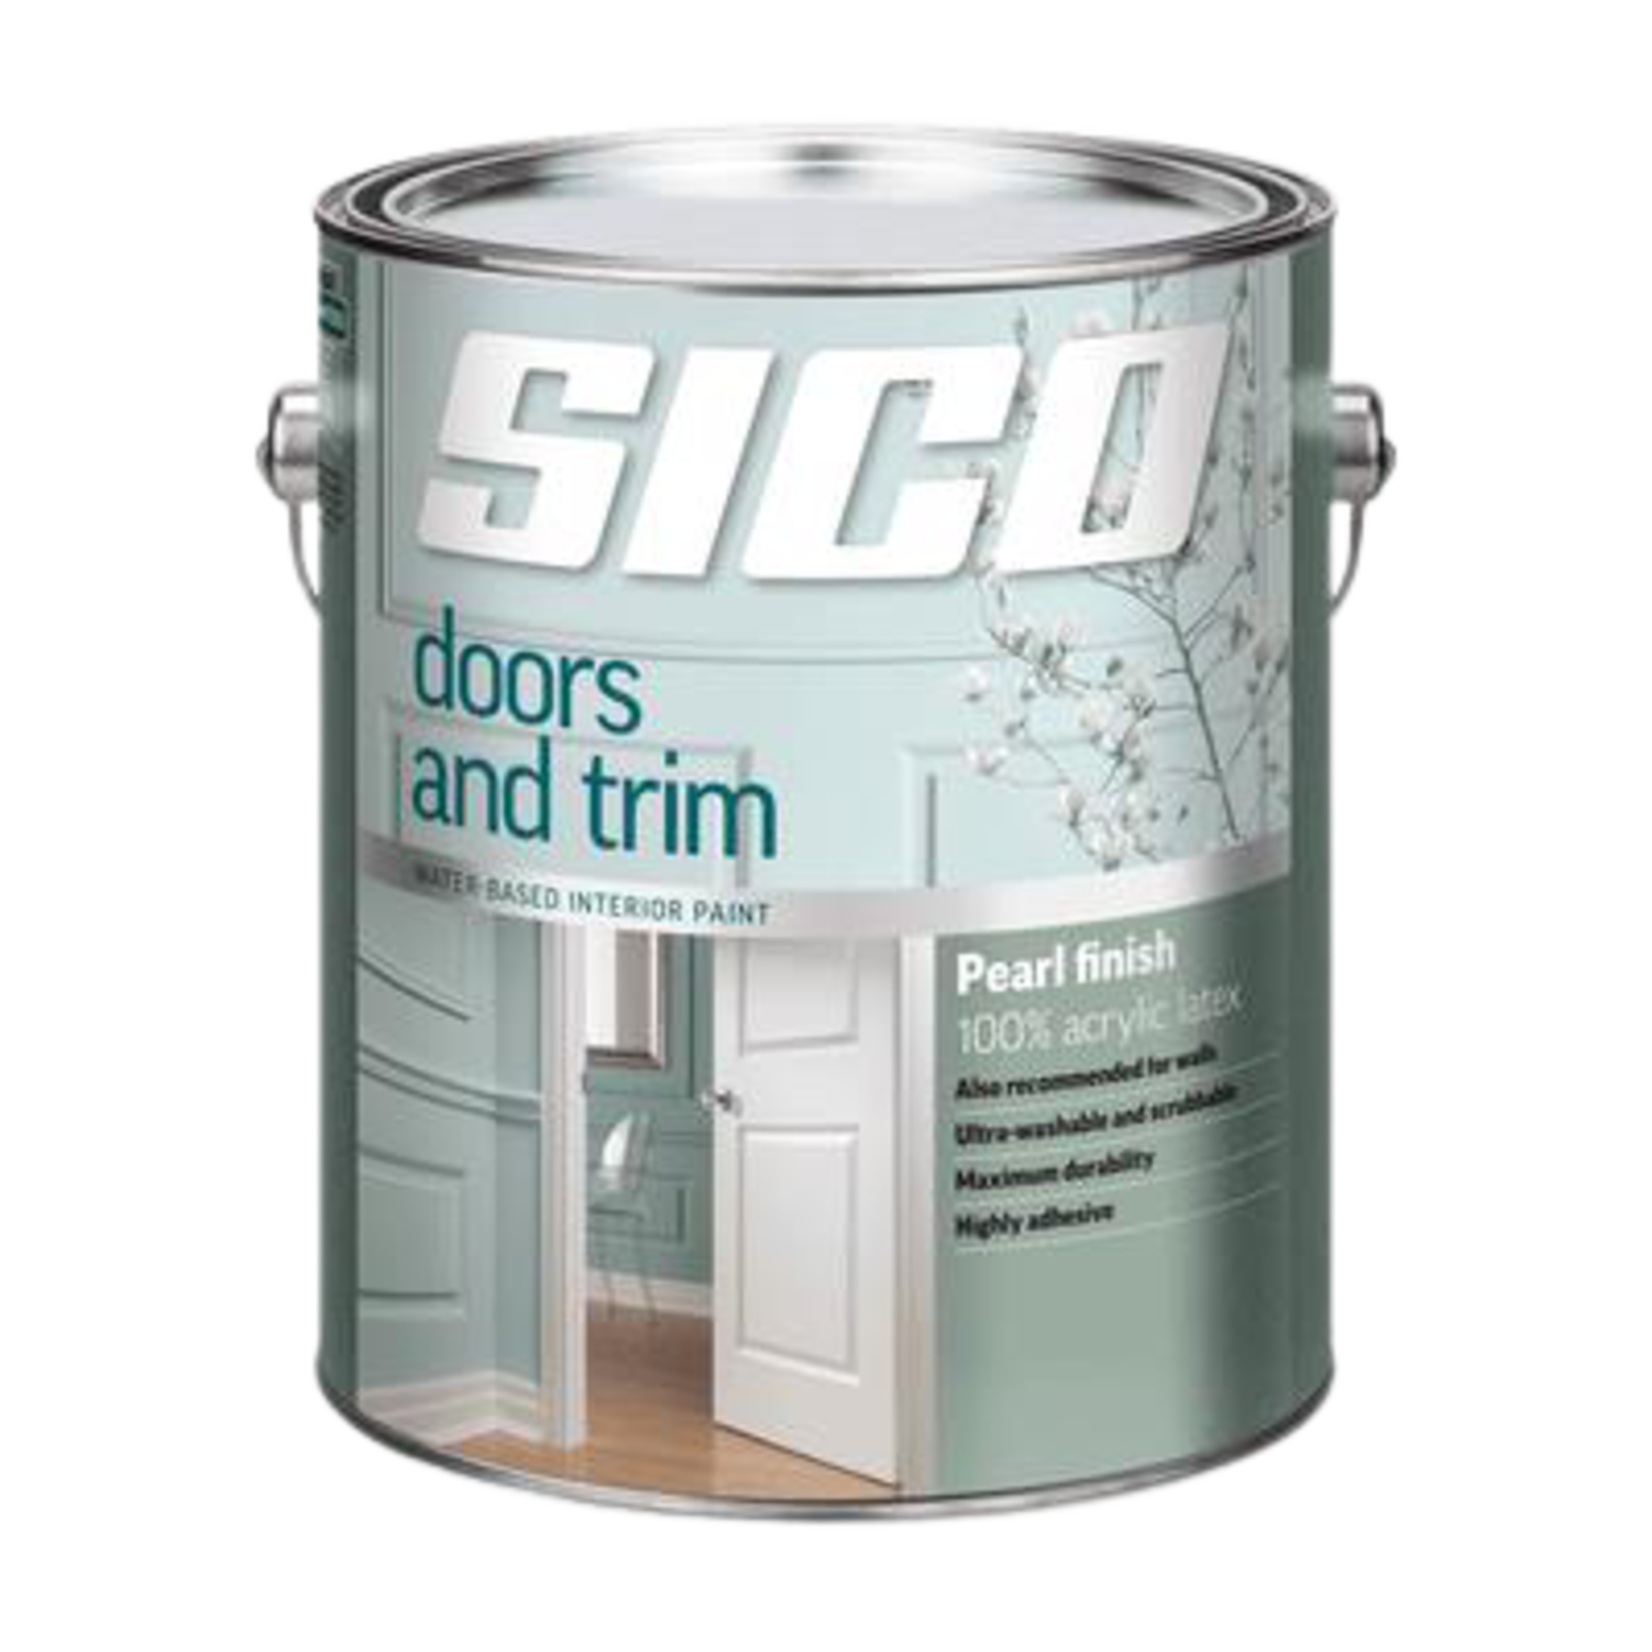 GALLON NATURAL WHITE DOORS AND TRIM PEARL FINISH SICO